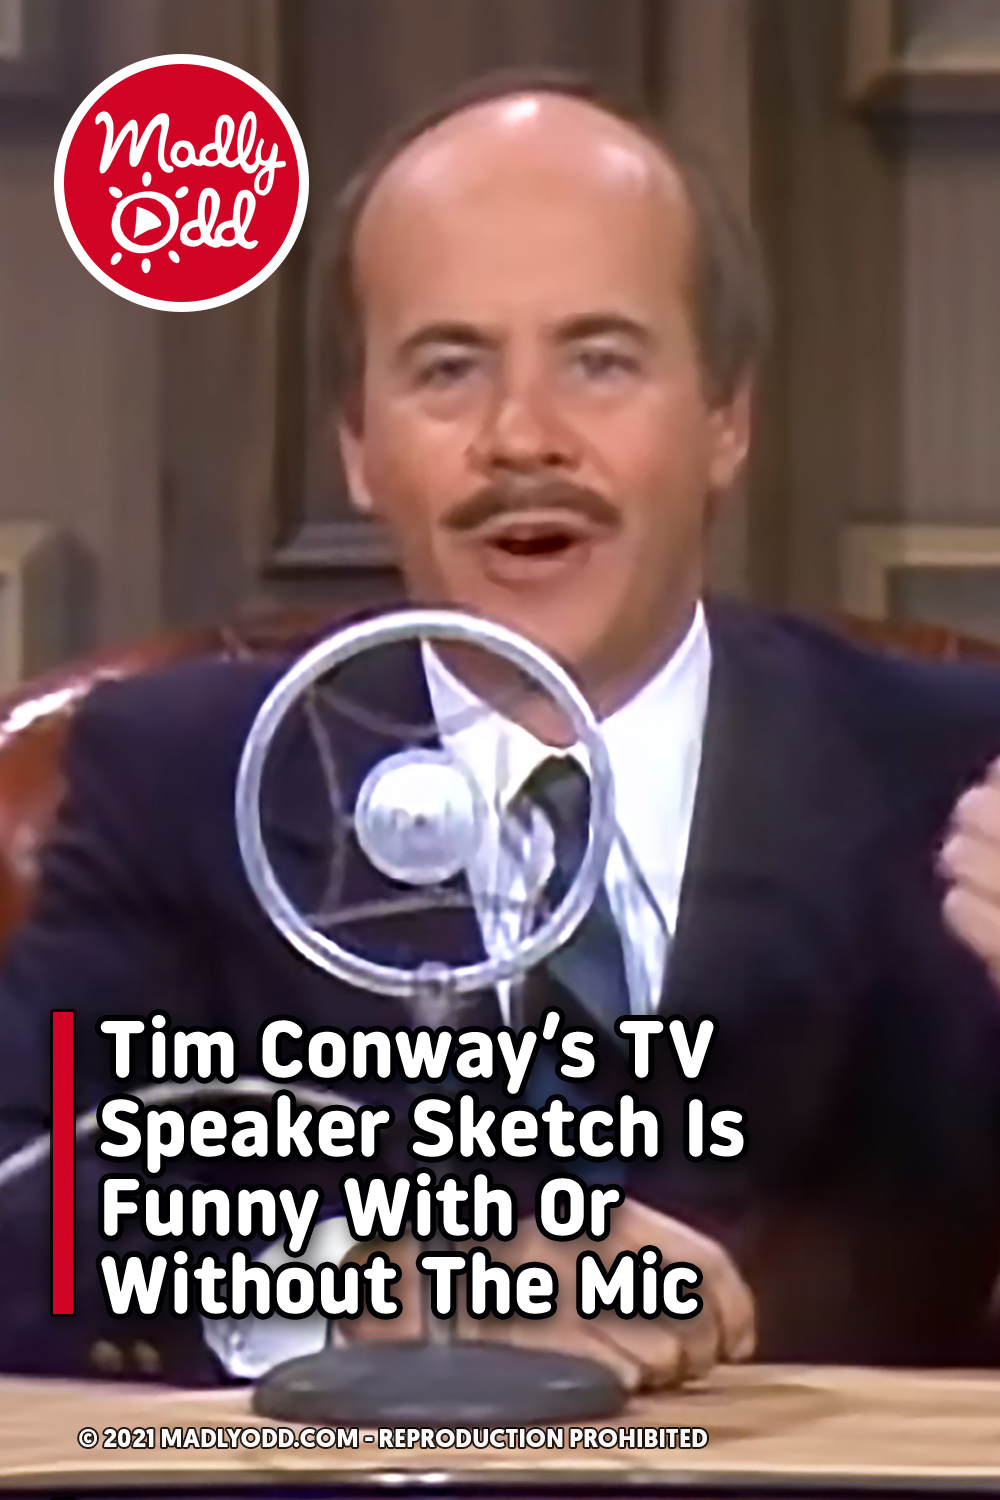 Tim Conway’s TV Speaker Sketch Is Funny With Or Without The Mic